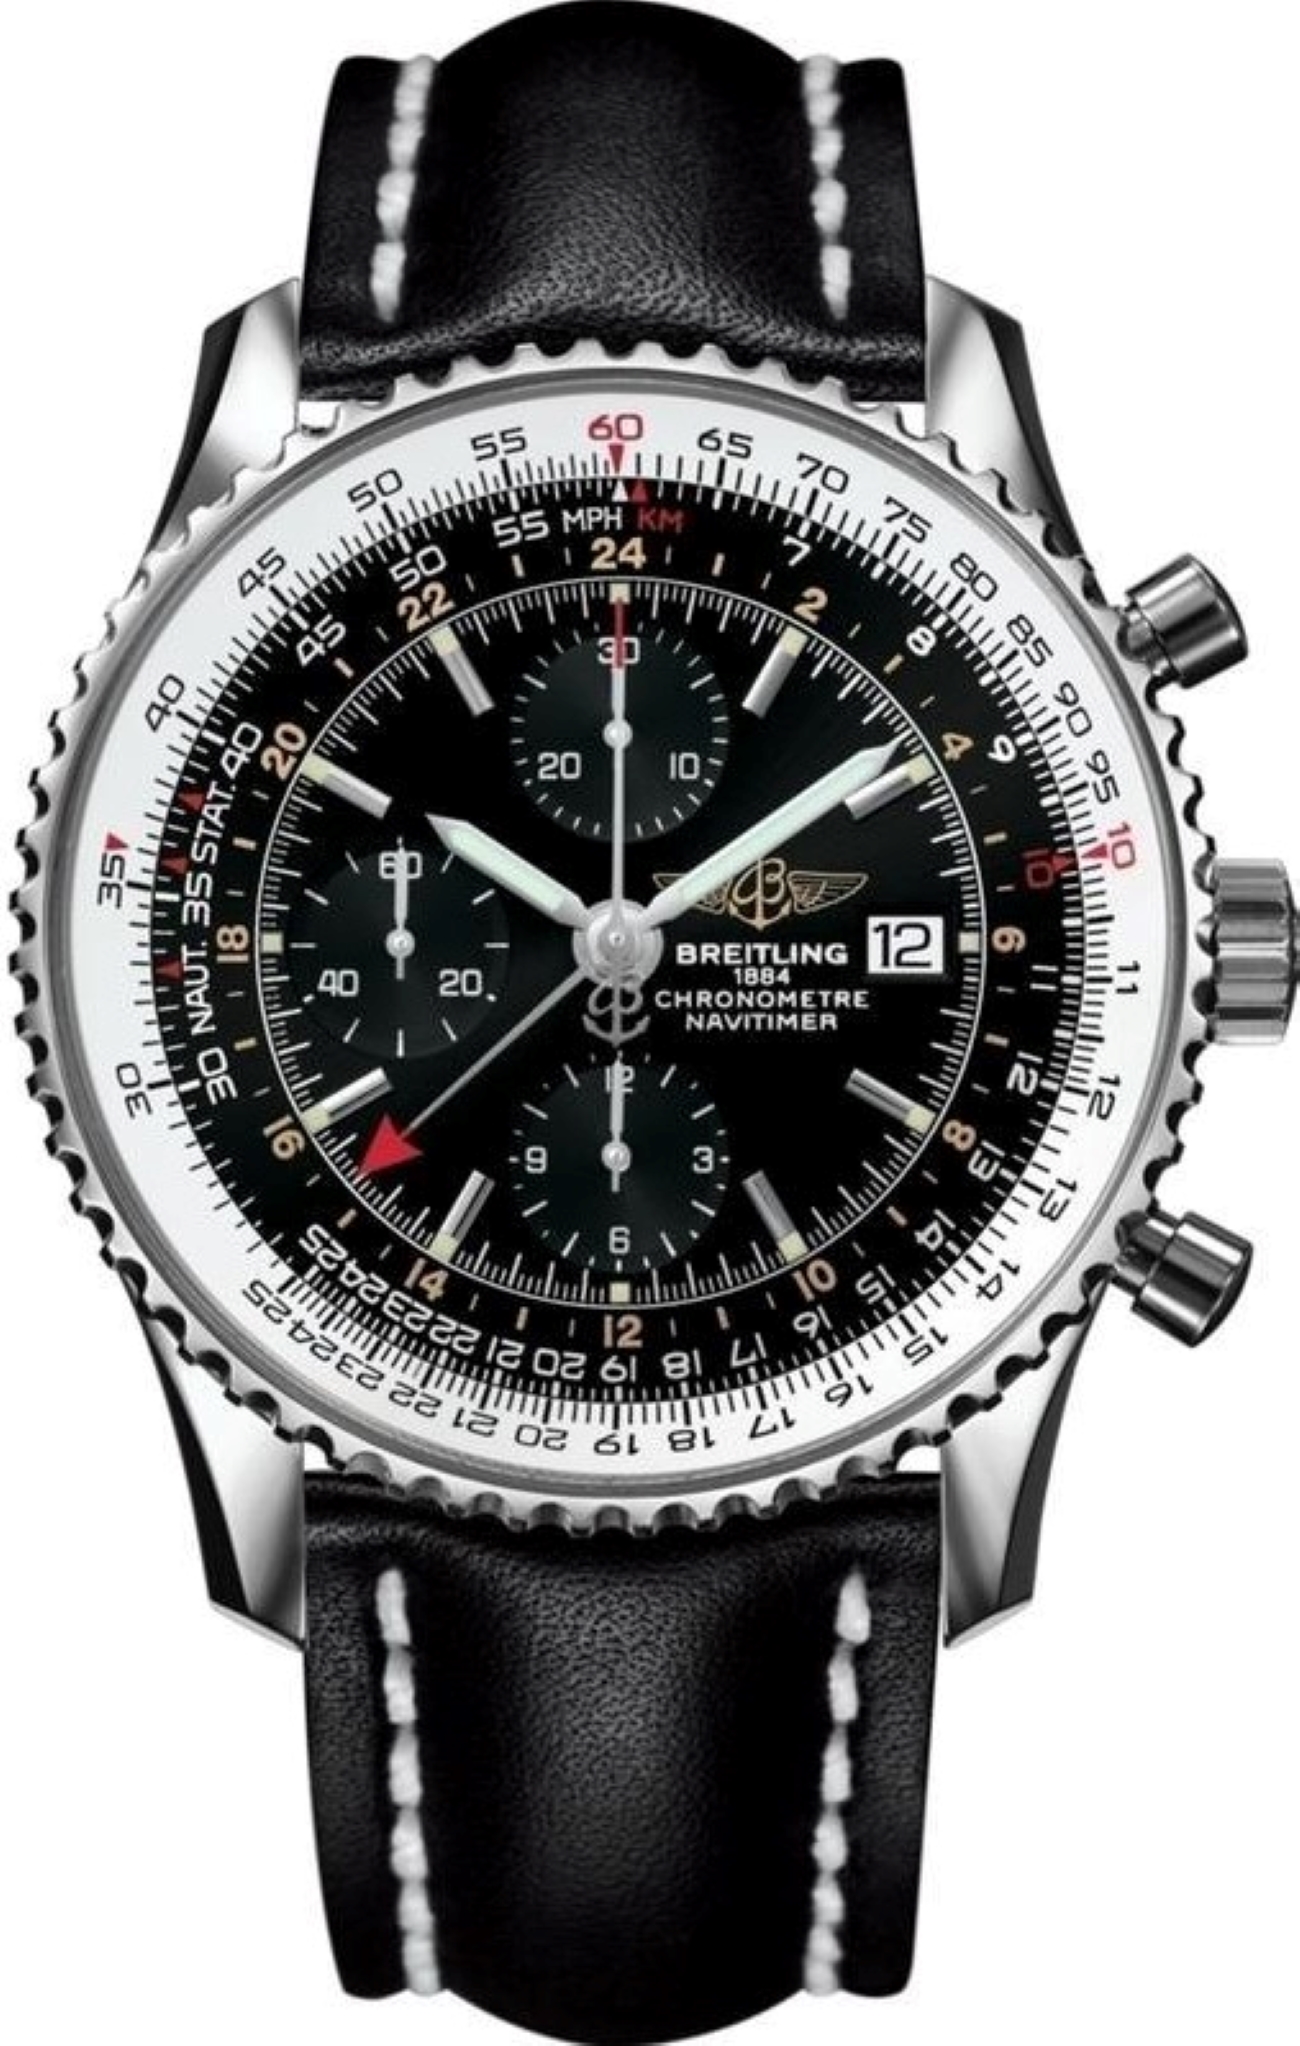 BREITLING NAVITIMER WORLD 46MM CHRONOGRAPH LEATHER STRAP REF: A2432212|C651|101X